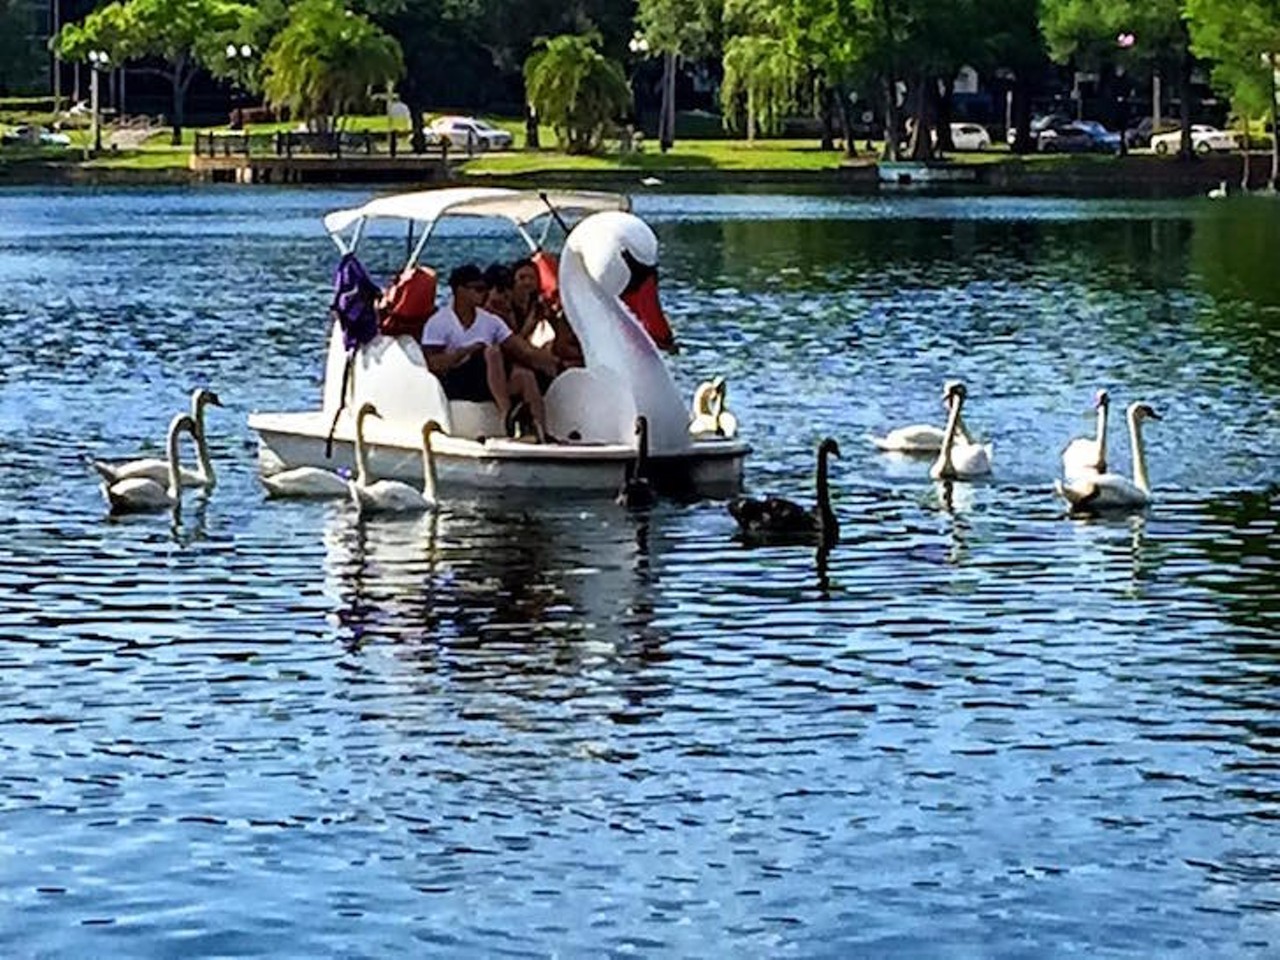 Lake Eola Park
512 E. Washington St.| 407-246-4484
In the heart of downtown, Lake Eola is the beating heart of Orlando. You can rent swan-shaped paddle boats, feed the swans that roam the park, catch a concert at the Walt Disney Amphitheater, or just relax and enjoy the sounds of the fountain.
Photo via Lake Eola Park/Facebook